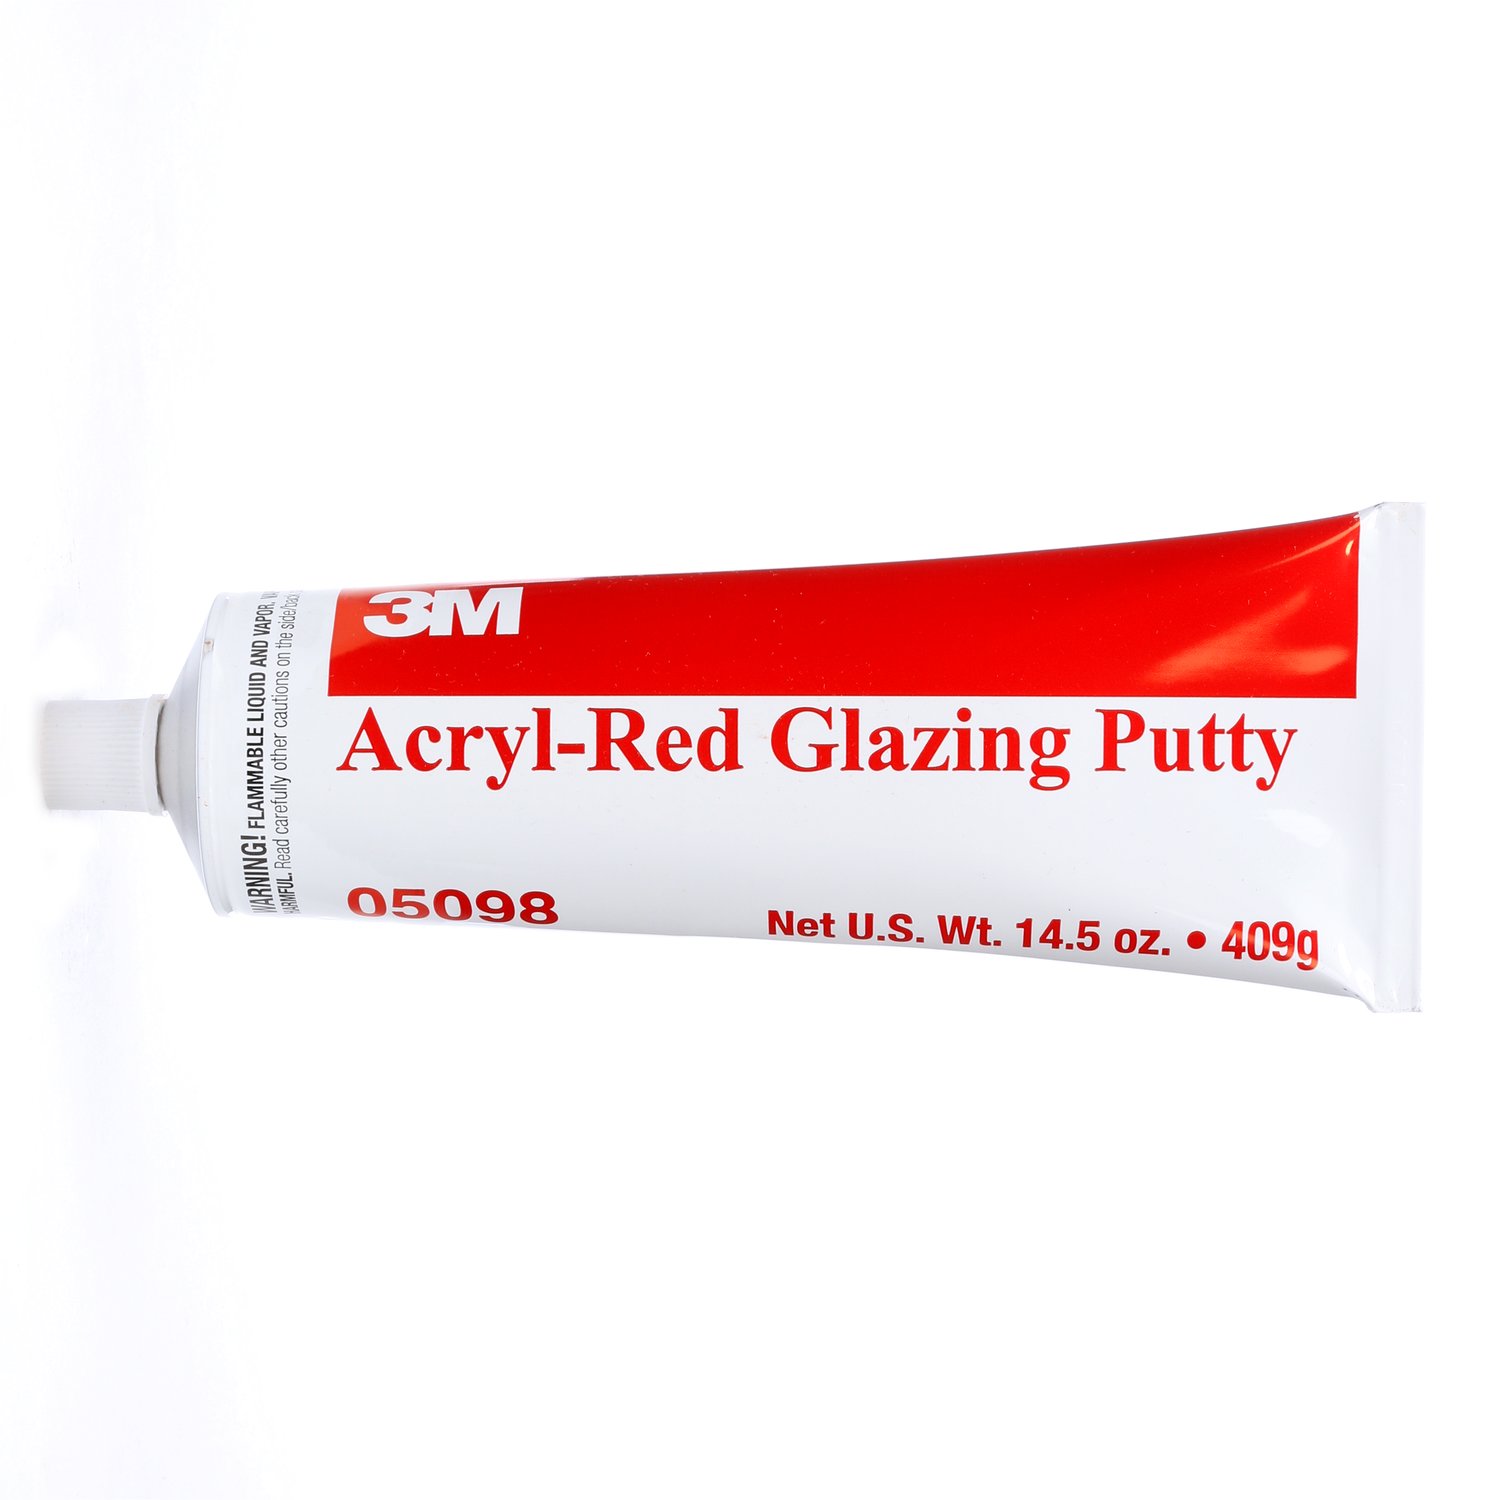 7000045481 - 3M Acryl Putty, 05098, Red, 14.5 oz, 12 tubes per case